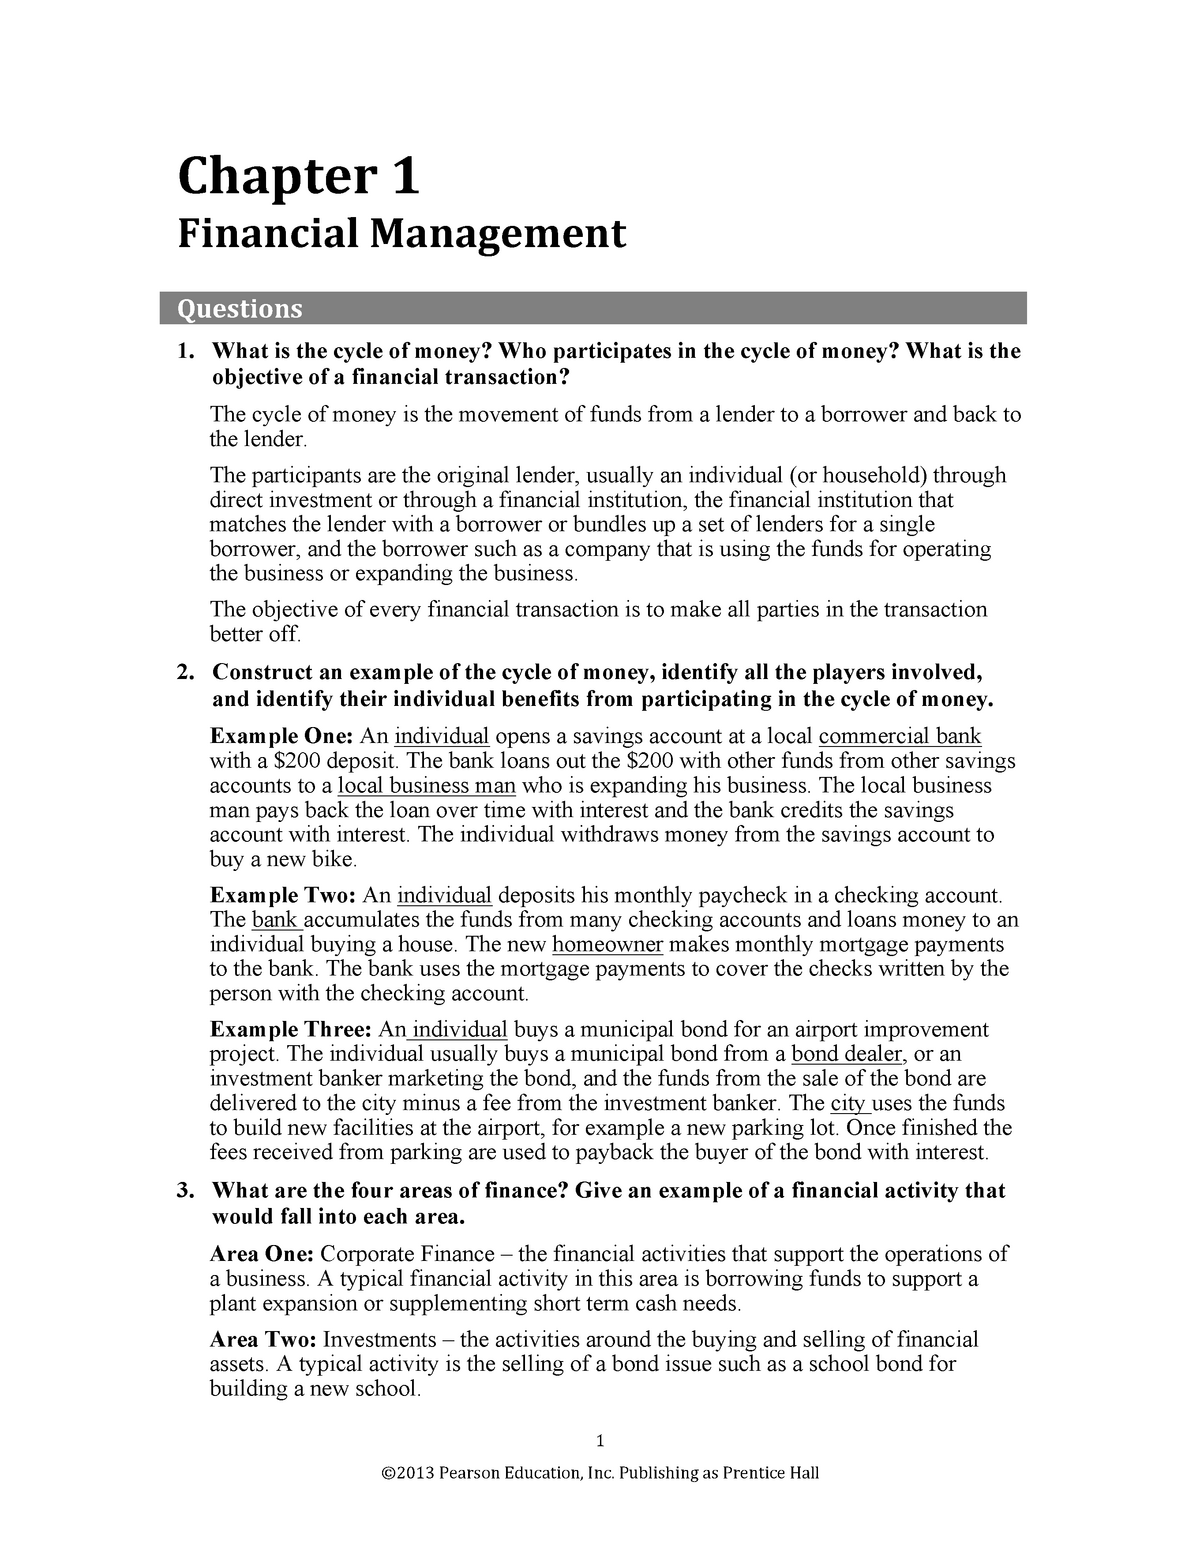 thesis on school financial management